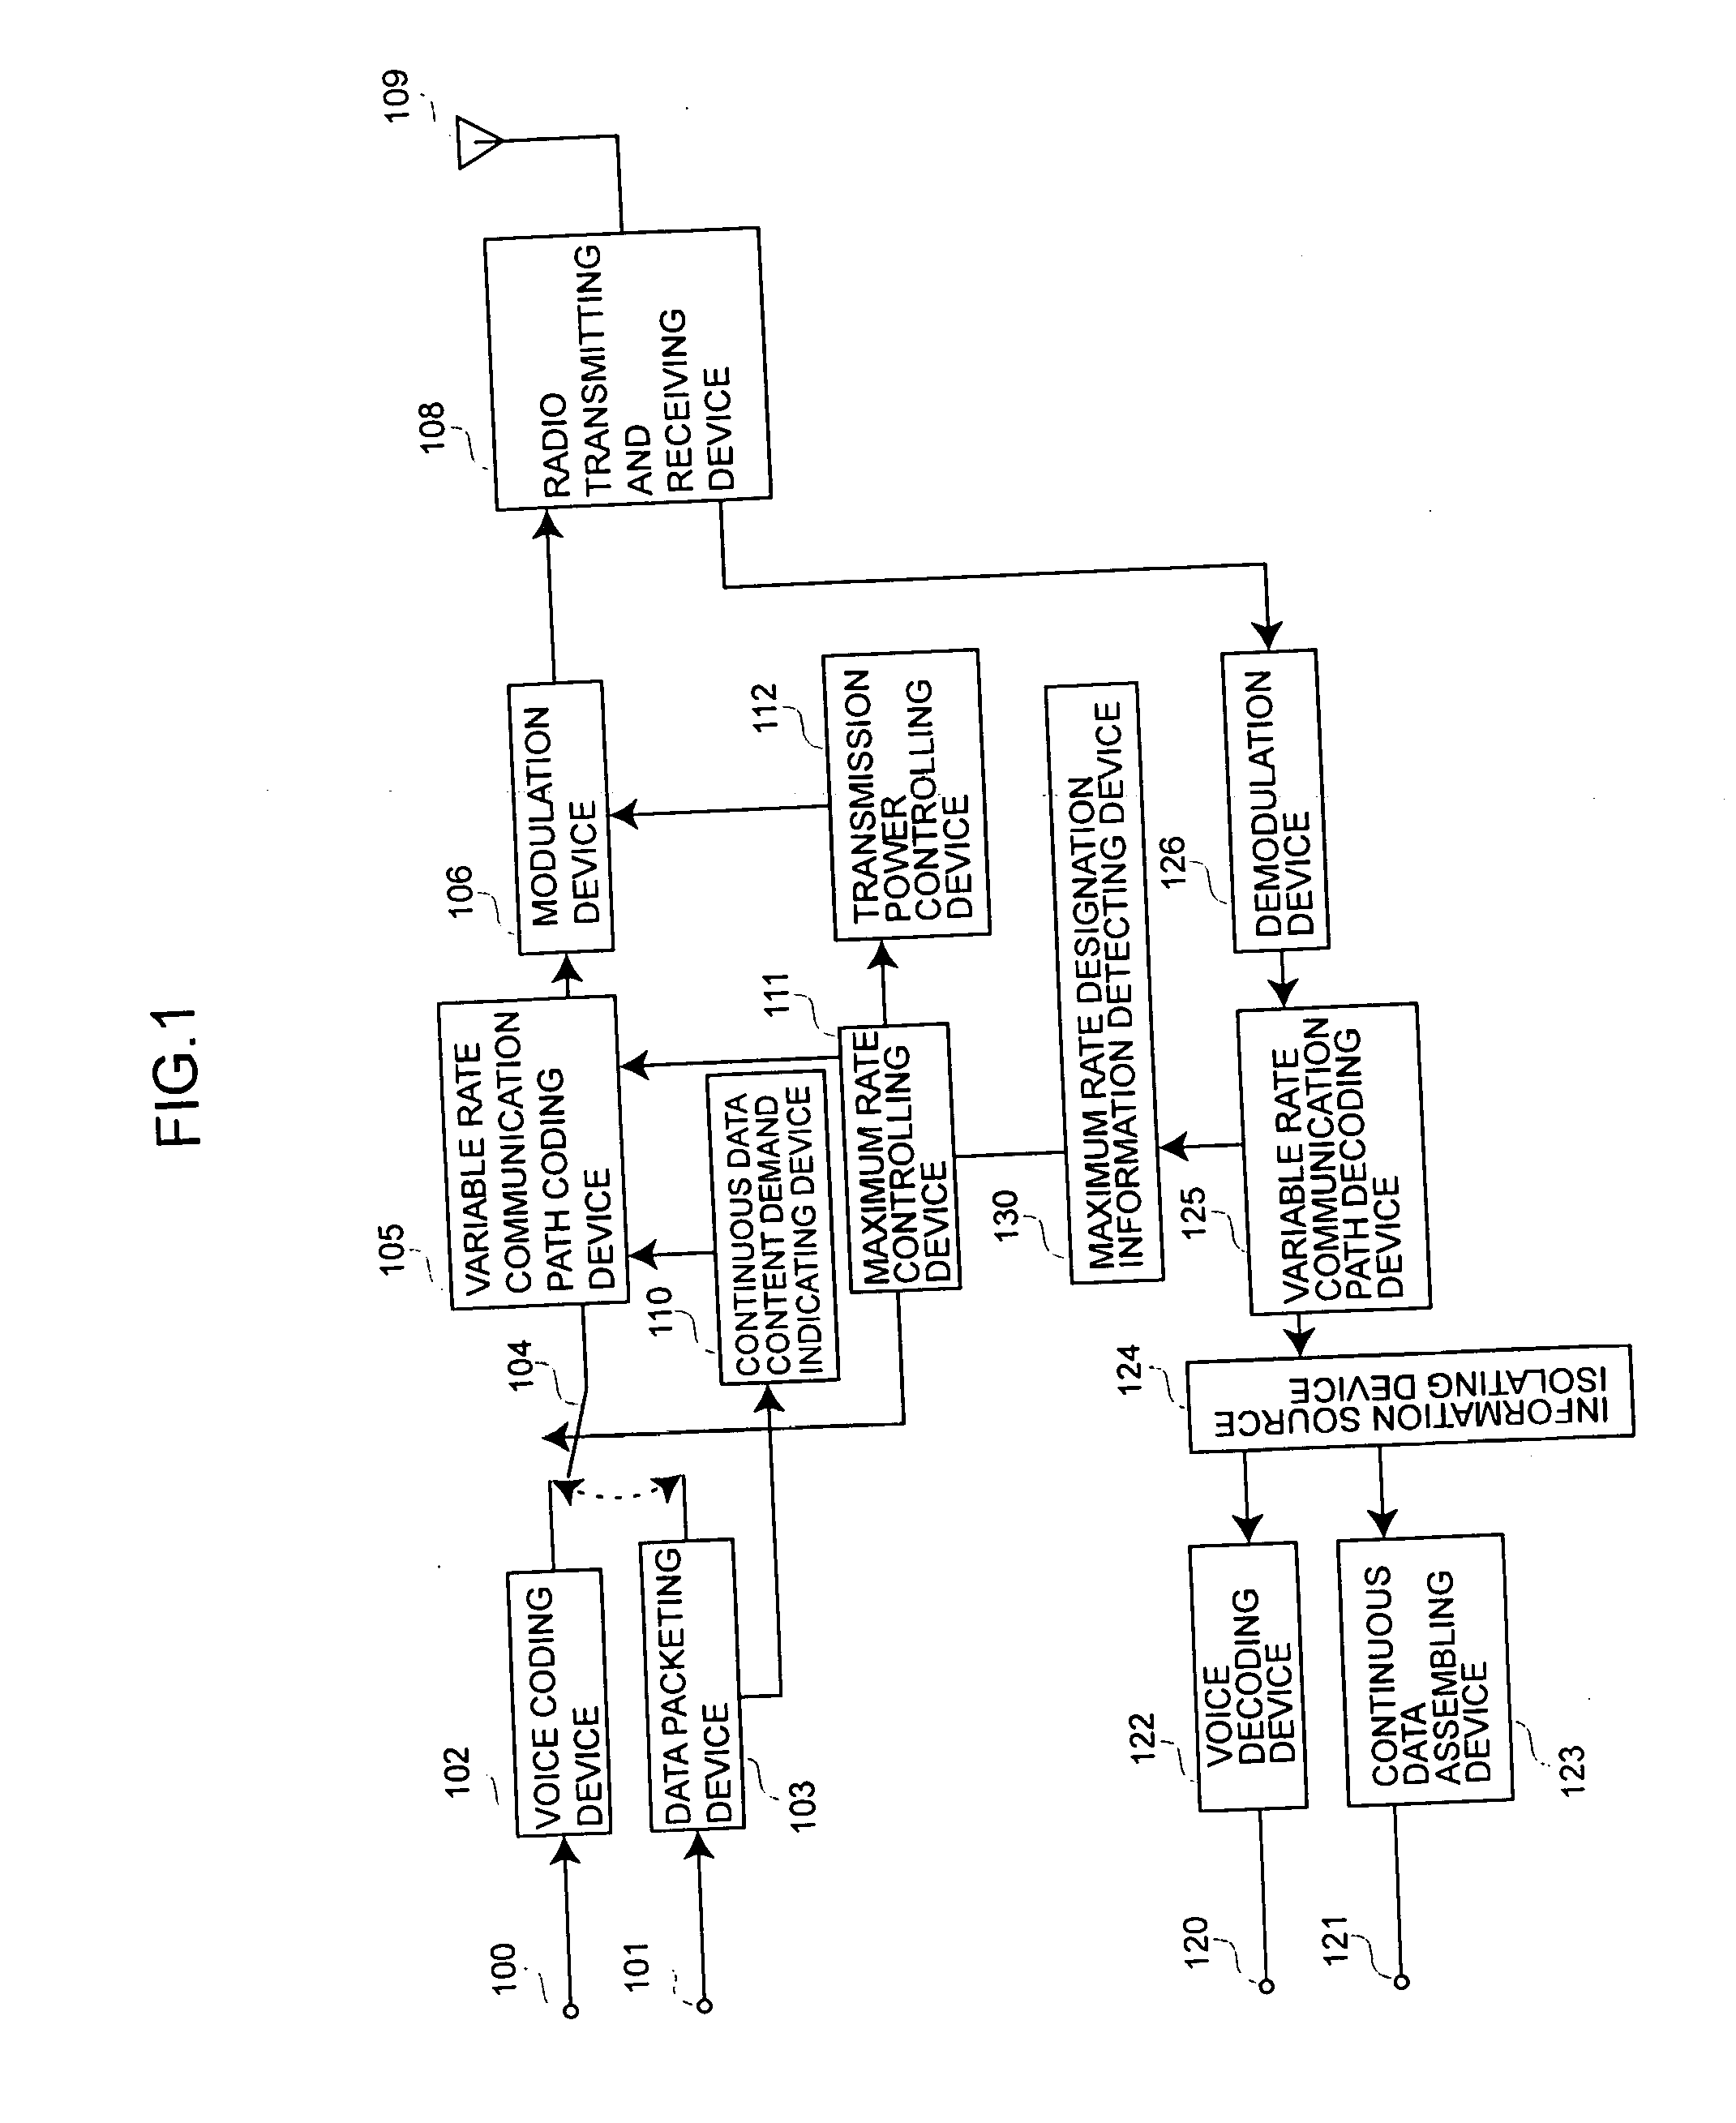 Data packet multi-access communicating method and transmitting and receiving apparatus therefor